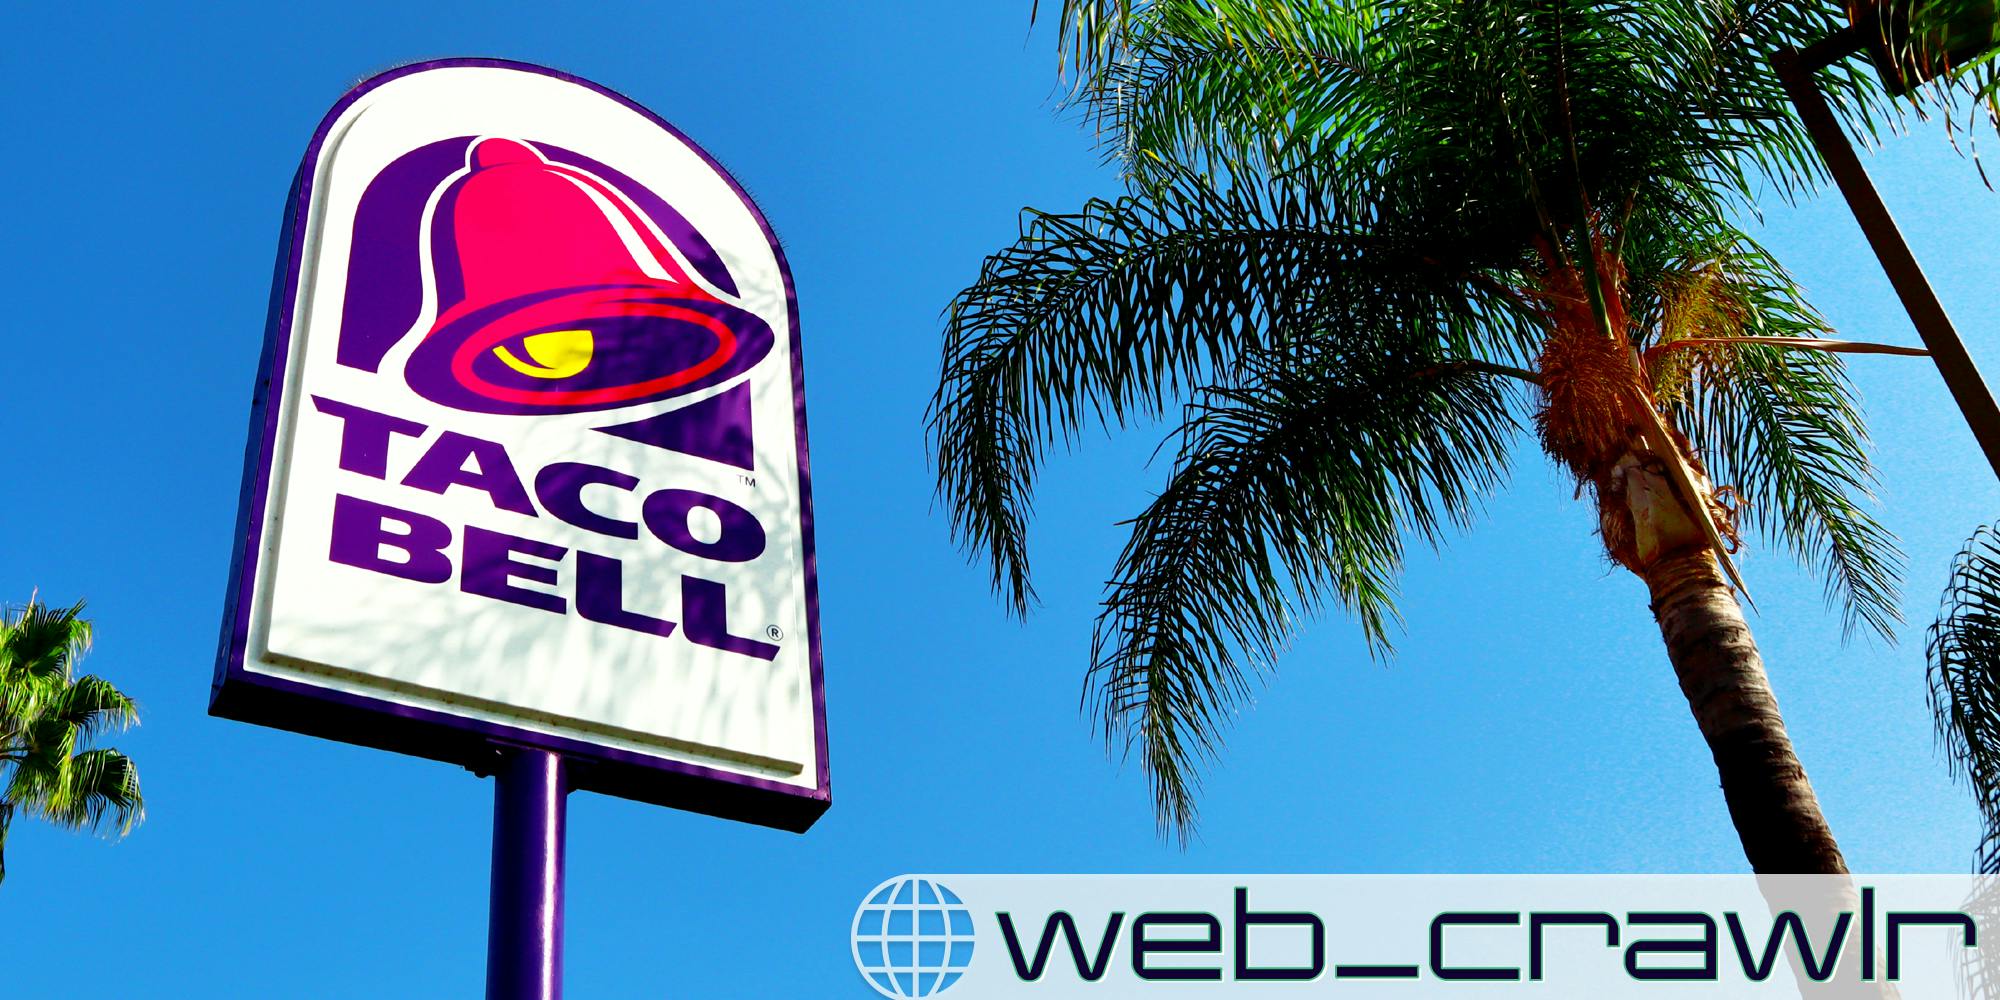 A Taco Bell sign. The Daily Dot newsletter web_crawlr logo is in the bottom right corner.